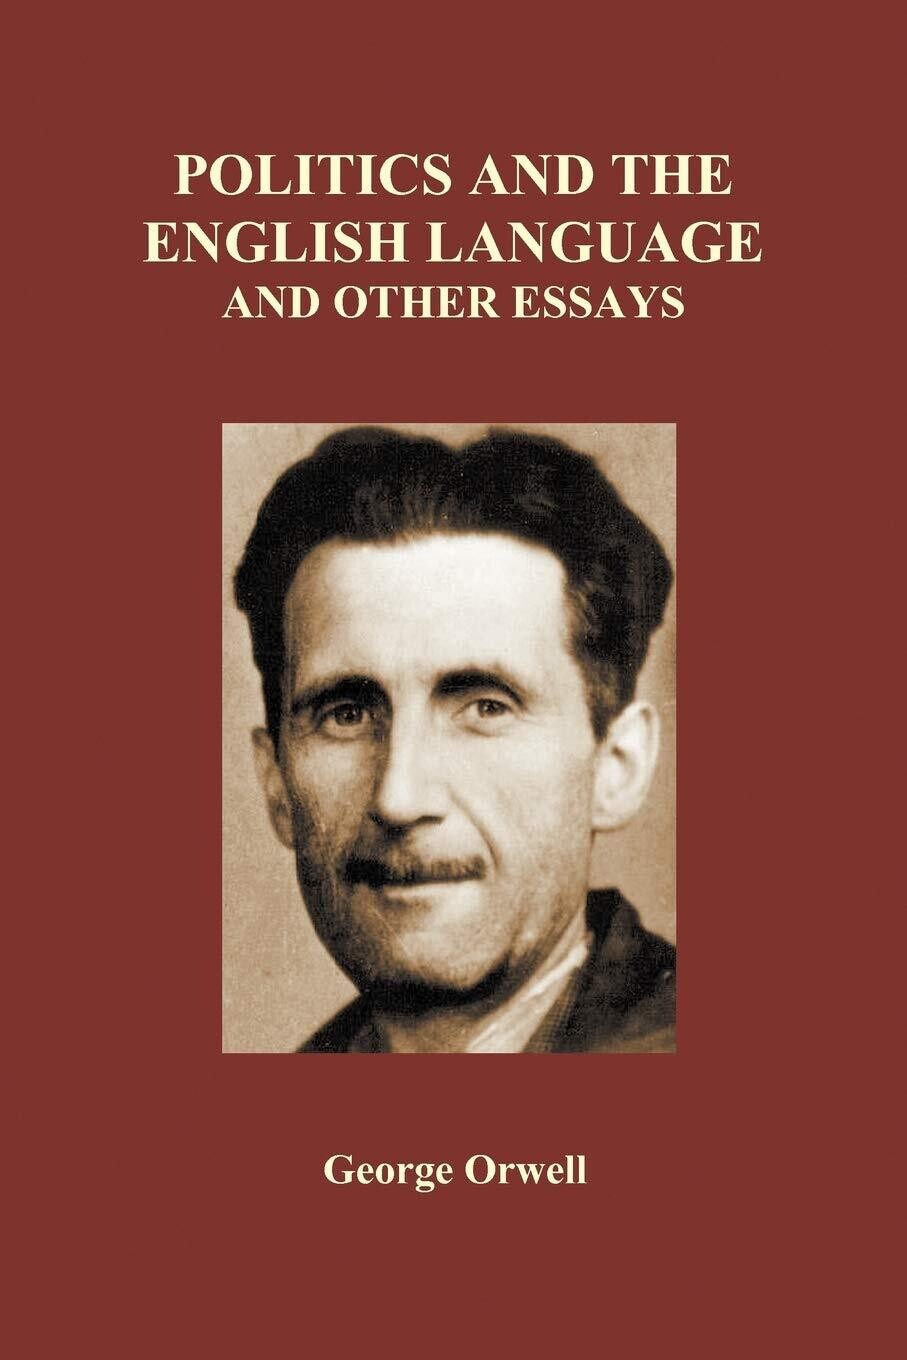 george orwell politics and the english language thesis